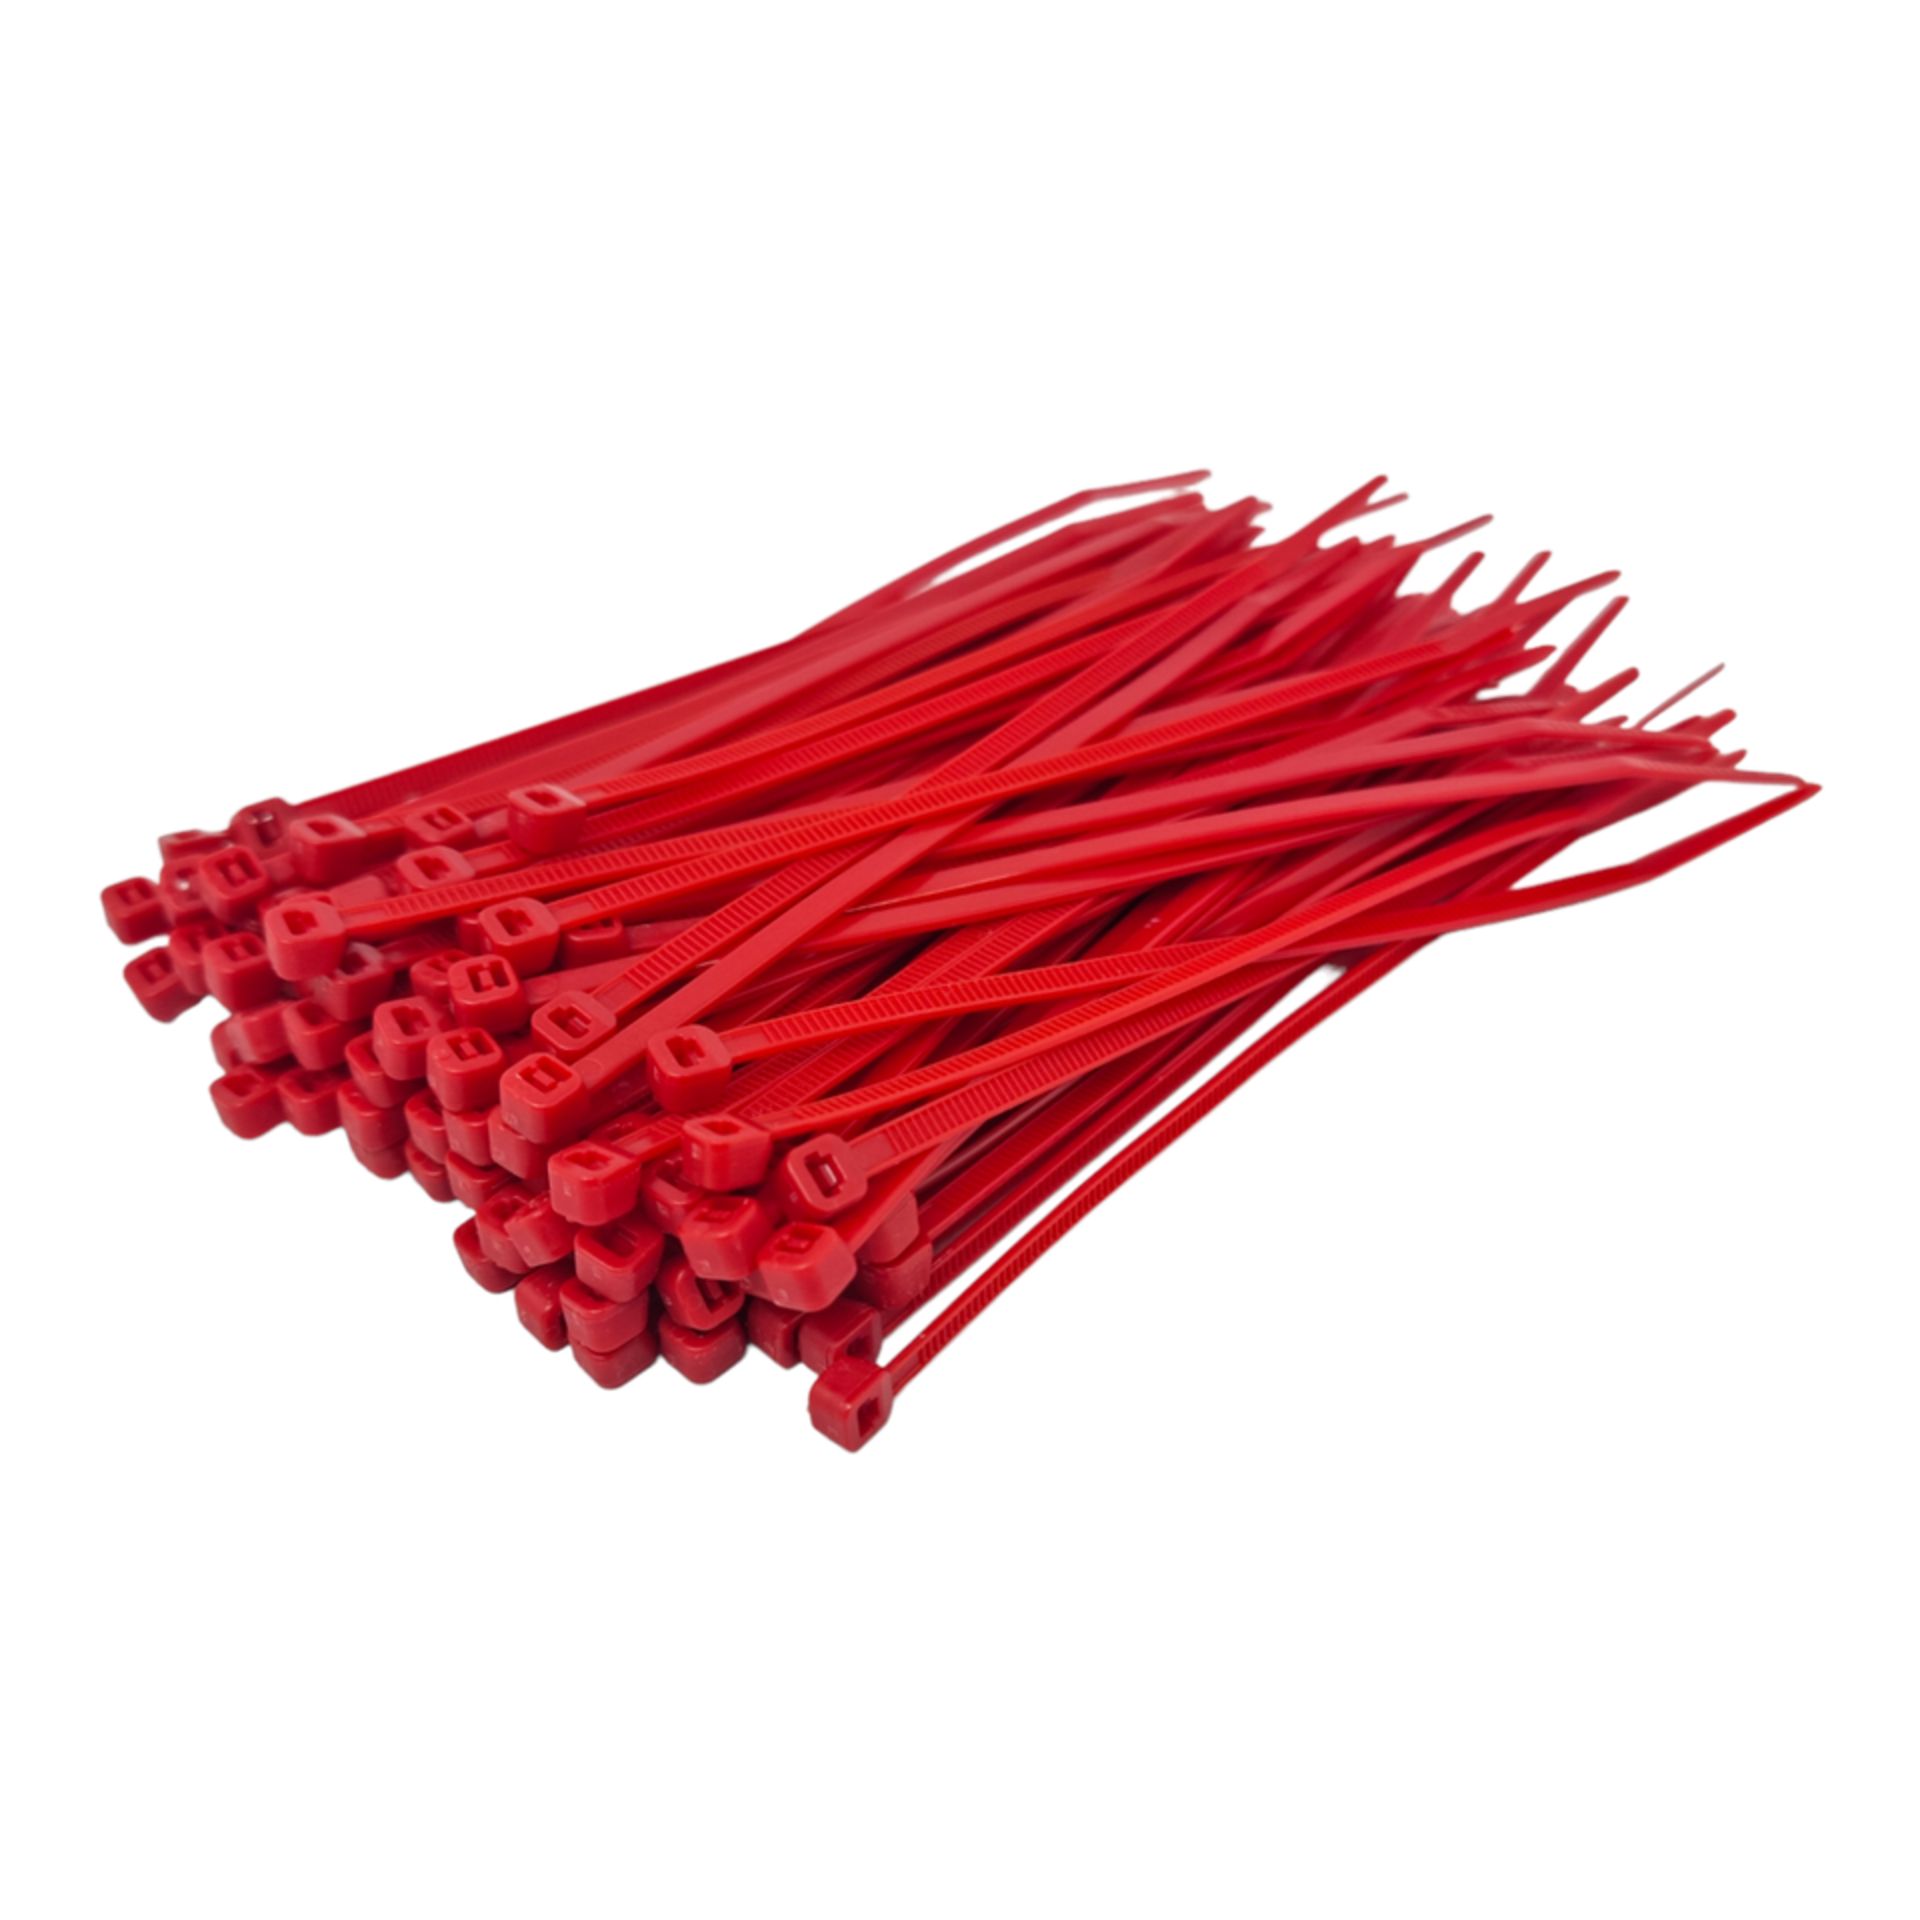 10 x Extra Strong Cable Ties Red Zip Tie Wraps 20cm Long Packs of 100